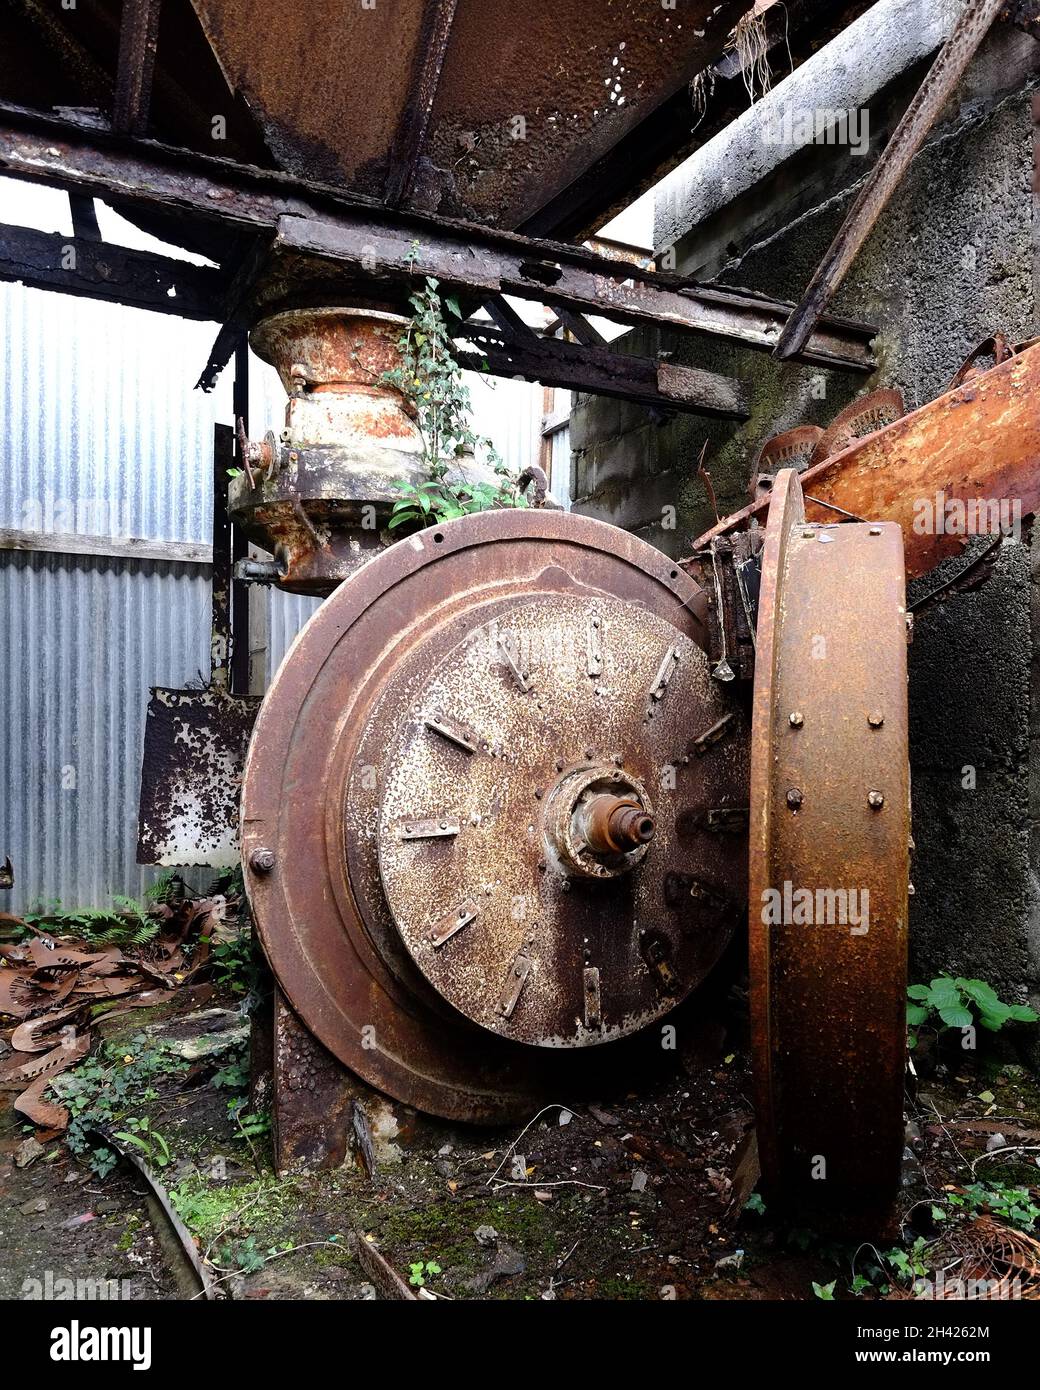 August 2021 - Rusty industrial dereliction in South Wales Stock Photo